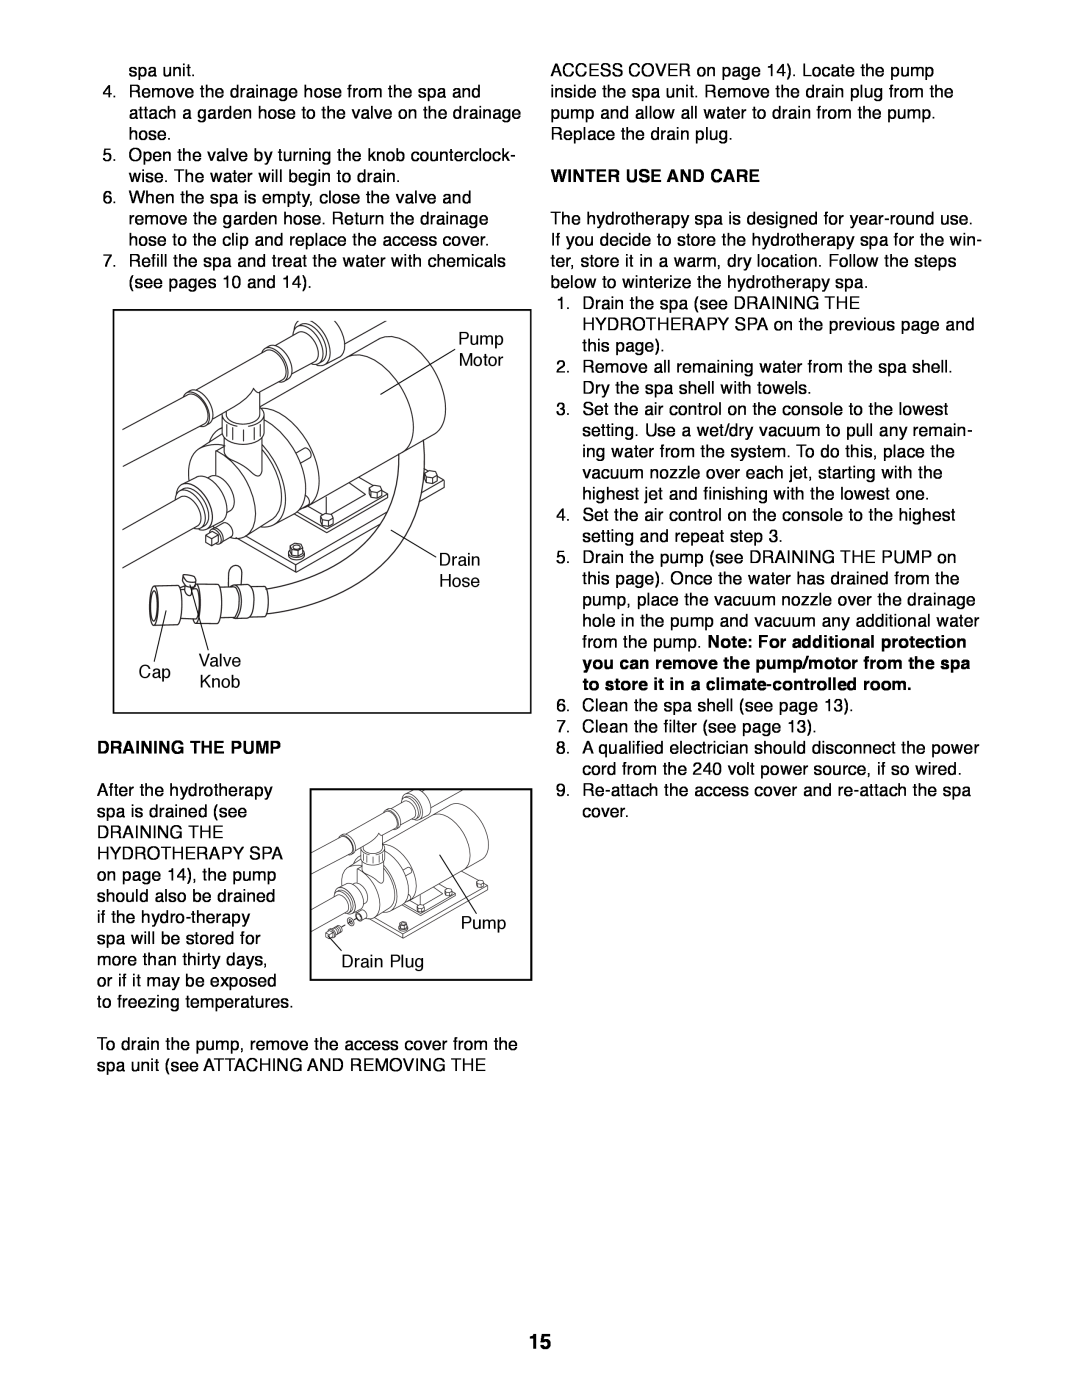 Weslo WLHS43081 manual Winter Use And Care, from the pump. Note For additional protection, Draining The Pump 